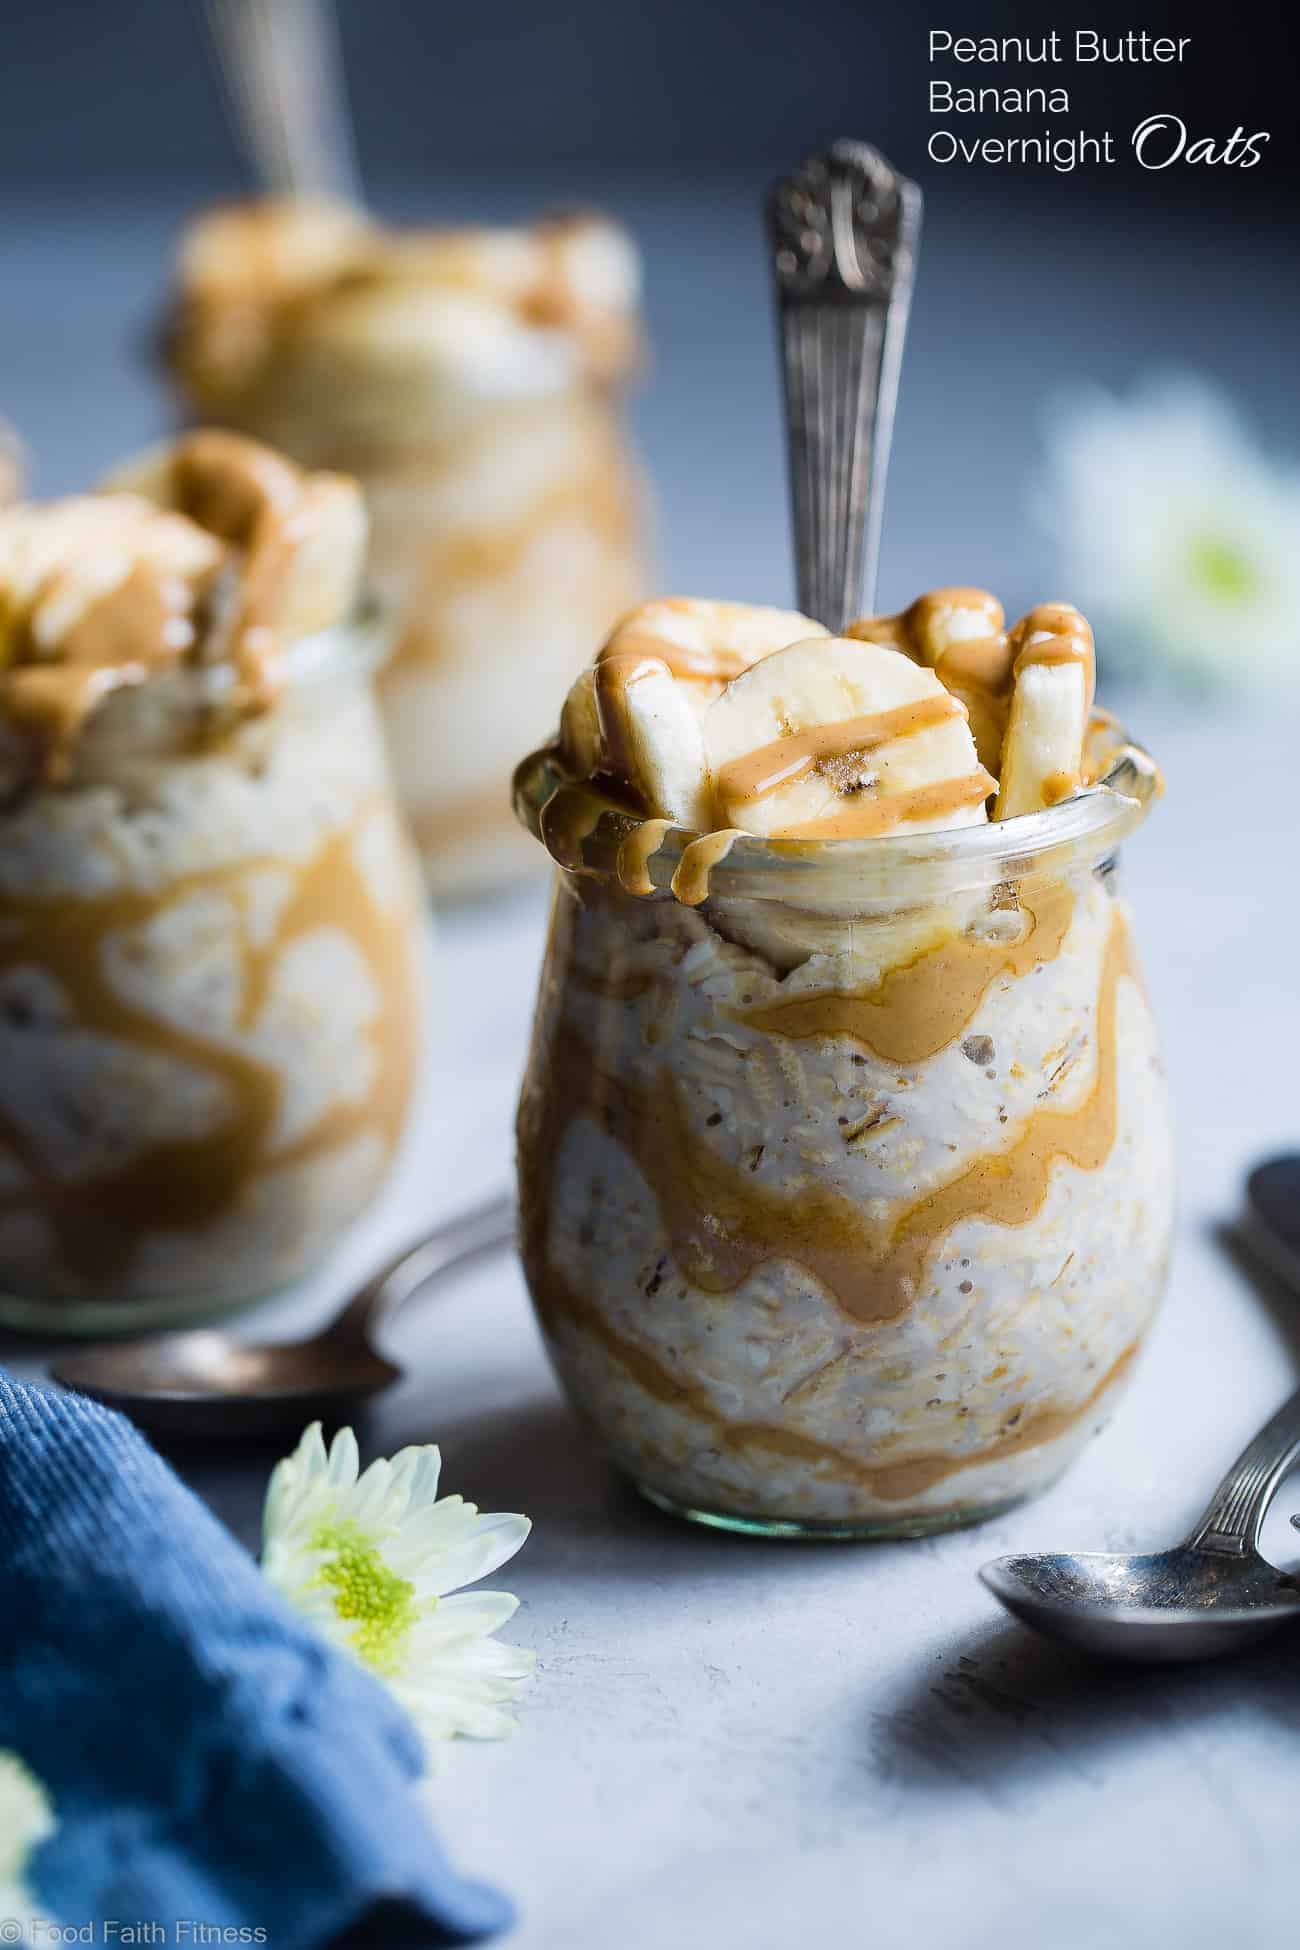 Banana Peanut Butter Overnight Oats - This make ahead, vegan overnight oats recipe is a healthy, 4 ingredient way to start the day! dairy, sugar and, gluten free and kid friendly too! | #Foodfaithfitness | #breakfast #glutenfree #kidfriendly #overnightoats #peanutbutter